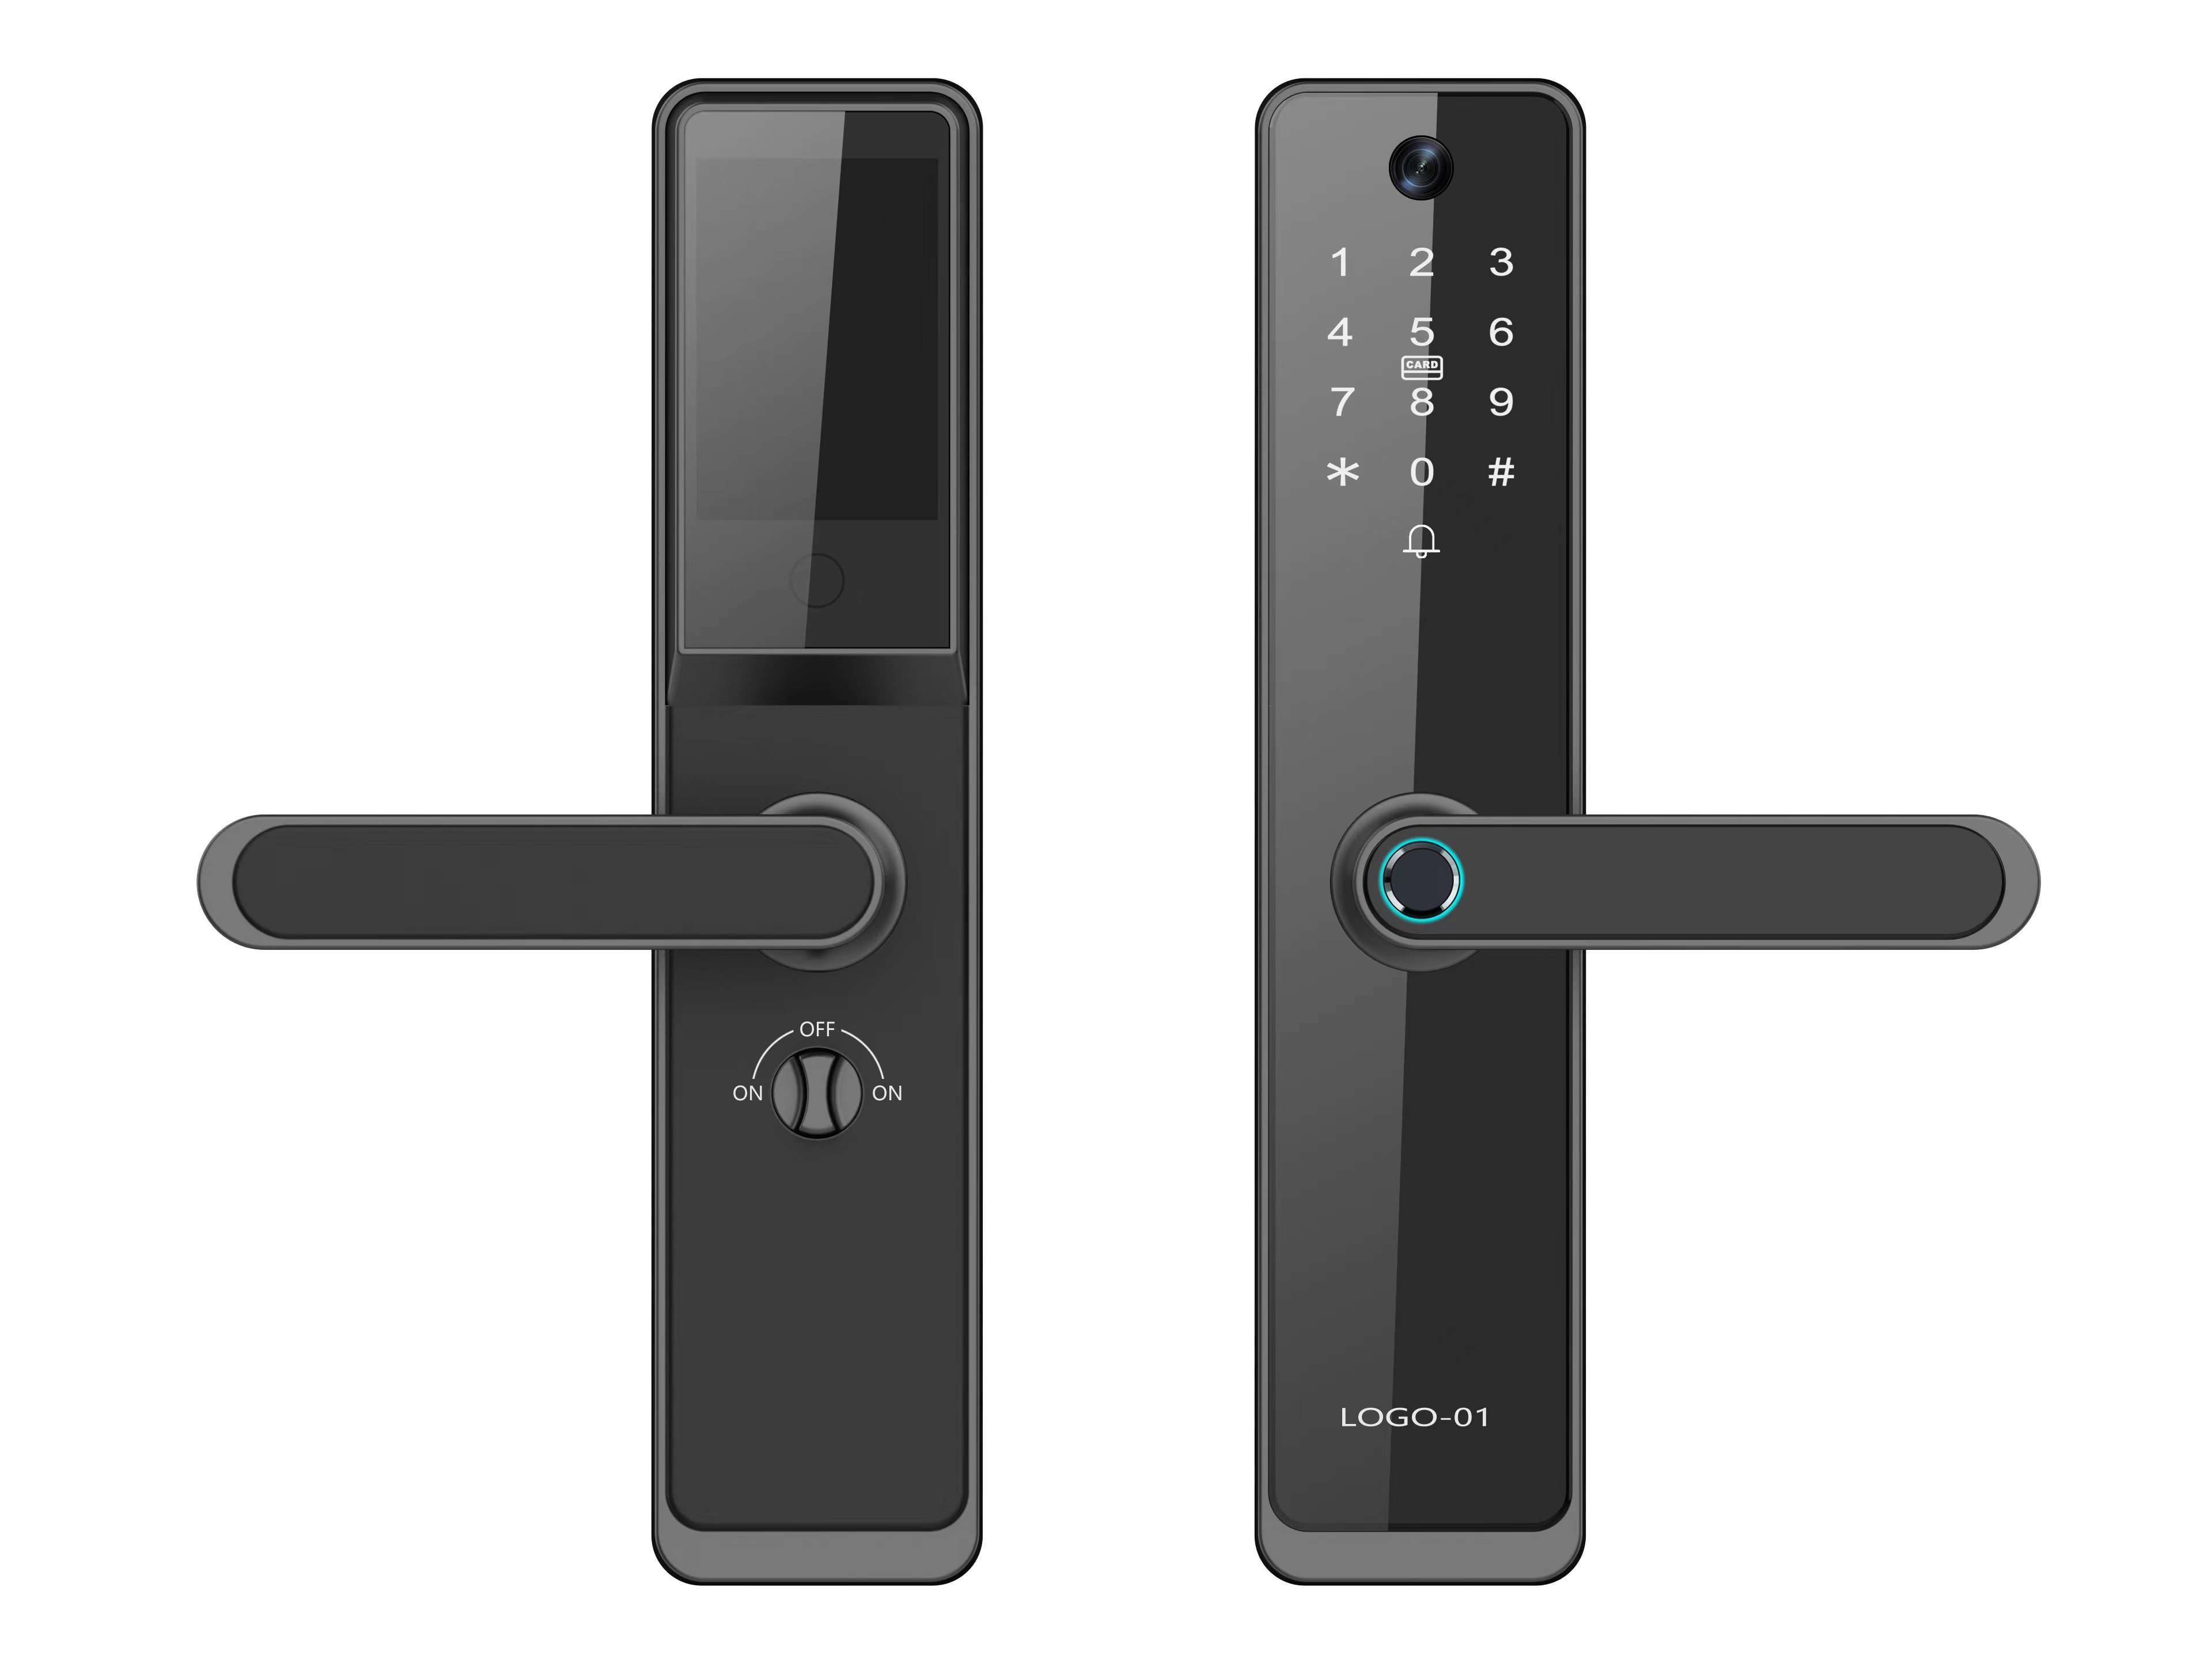 New Arrival Model 630: Smart Lock Built-in Camera and Screen